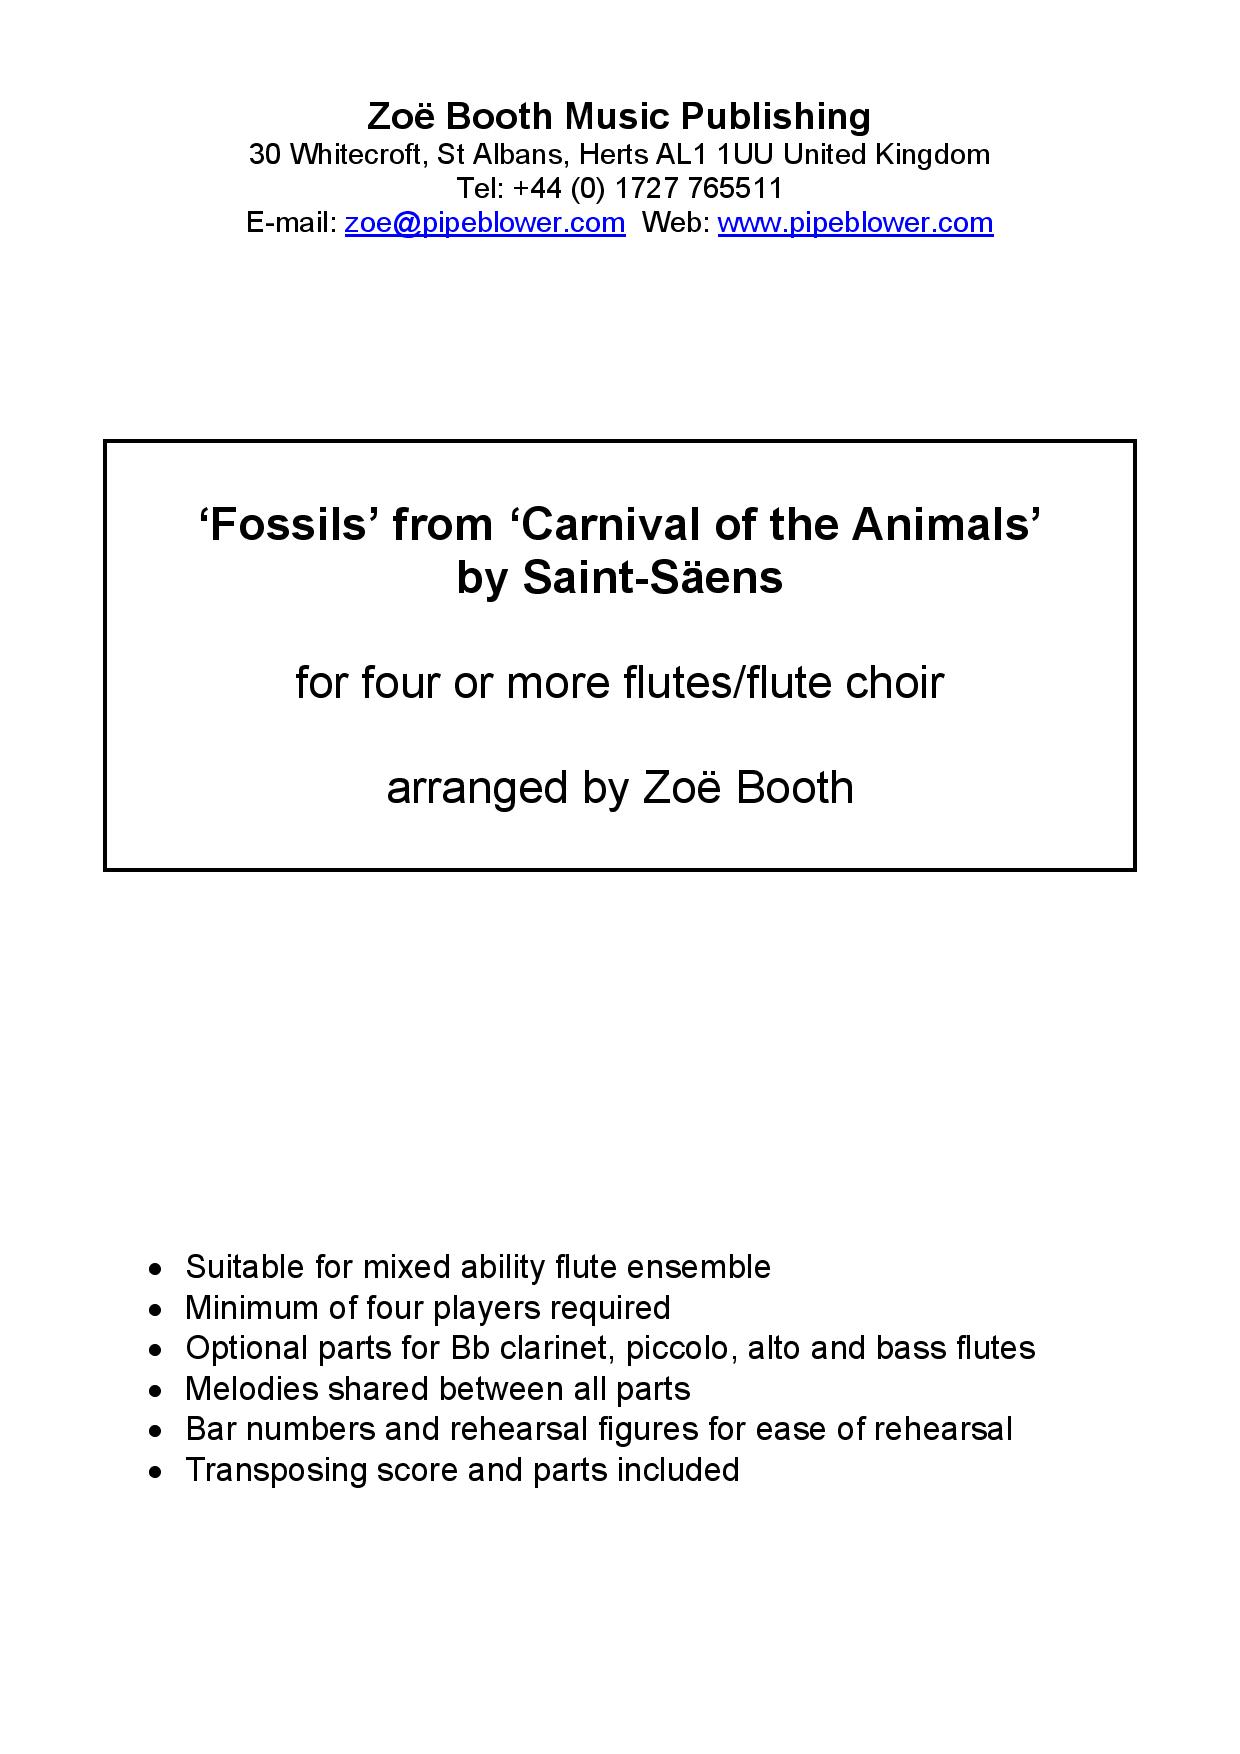 Fossils by Saint-Saëns  arranged by Zoë Booth for four or more flutes/flute choir